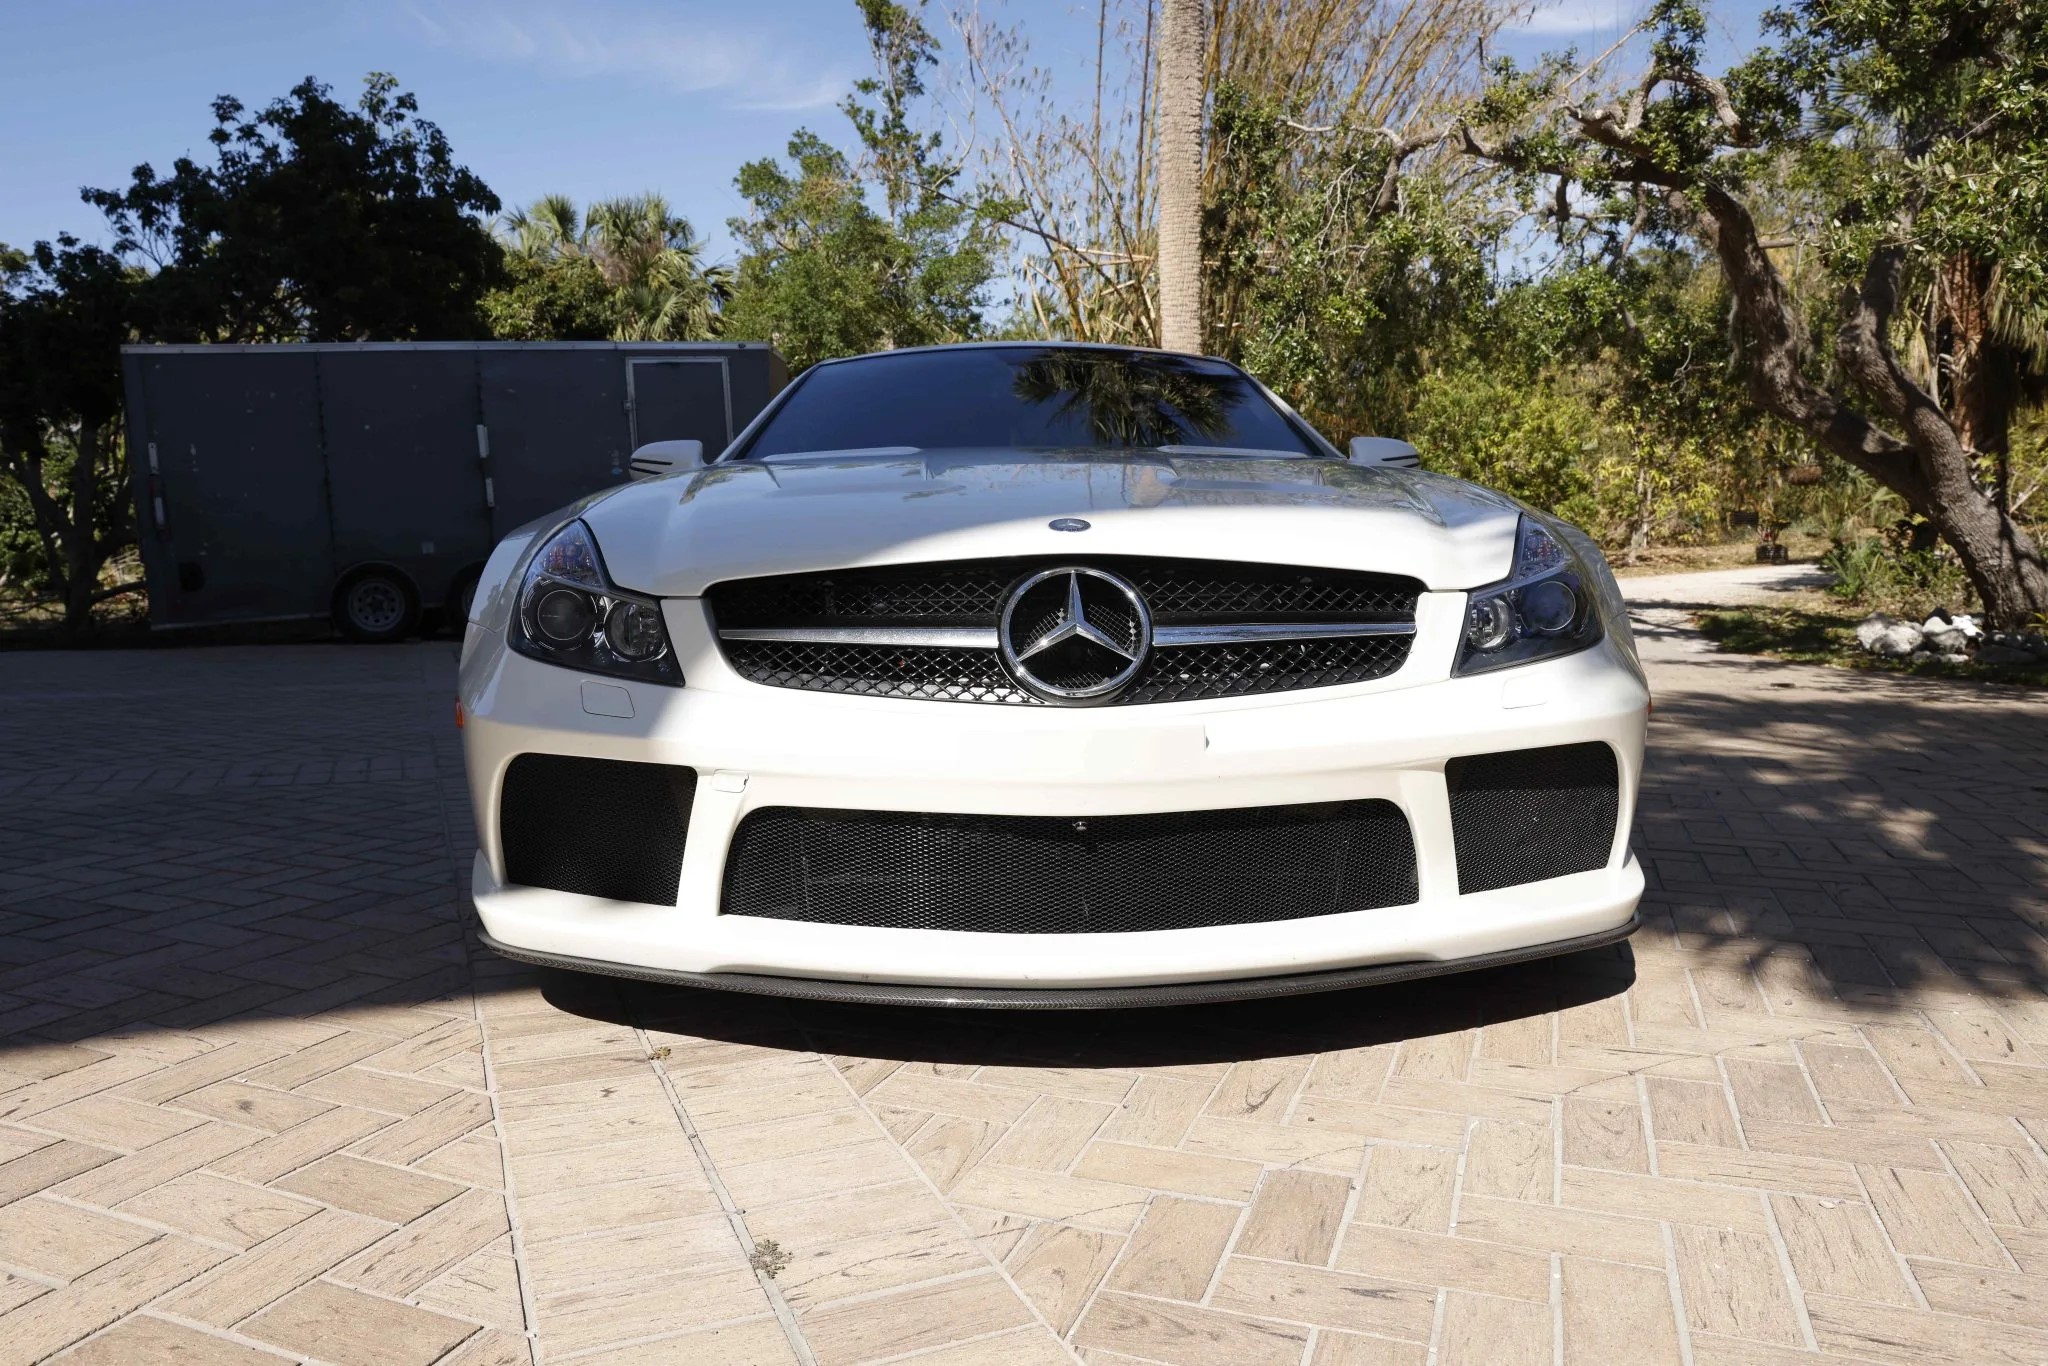 frontal view of a white 2009 mercedes benz sl65 amg black series